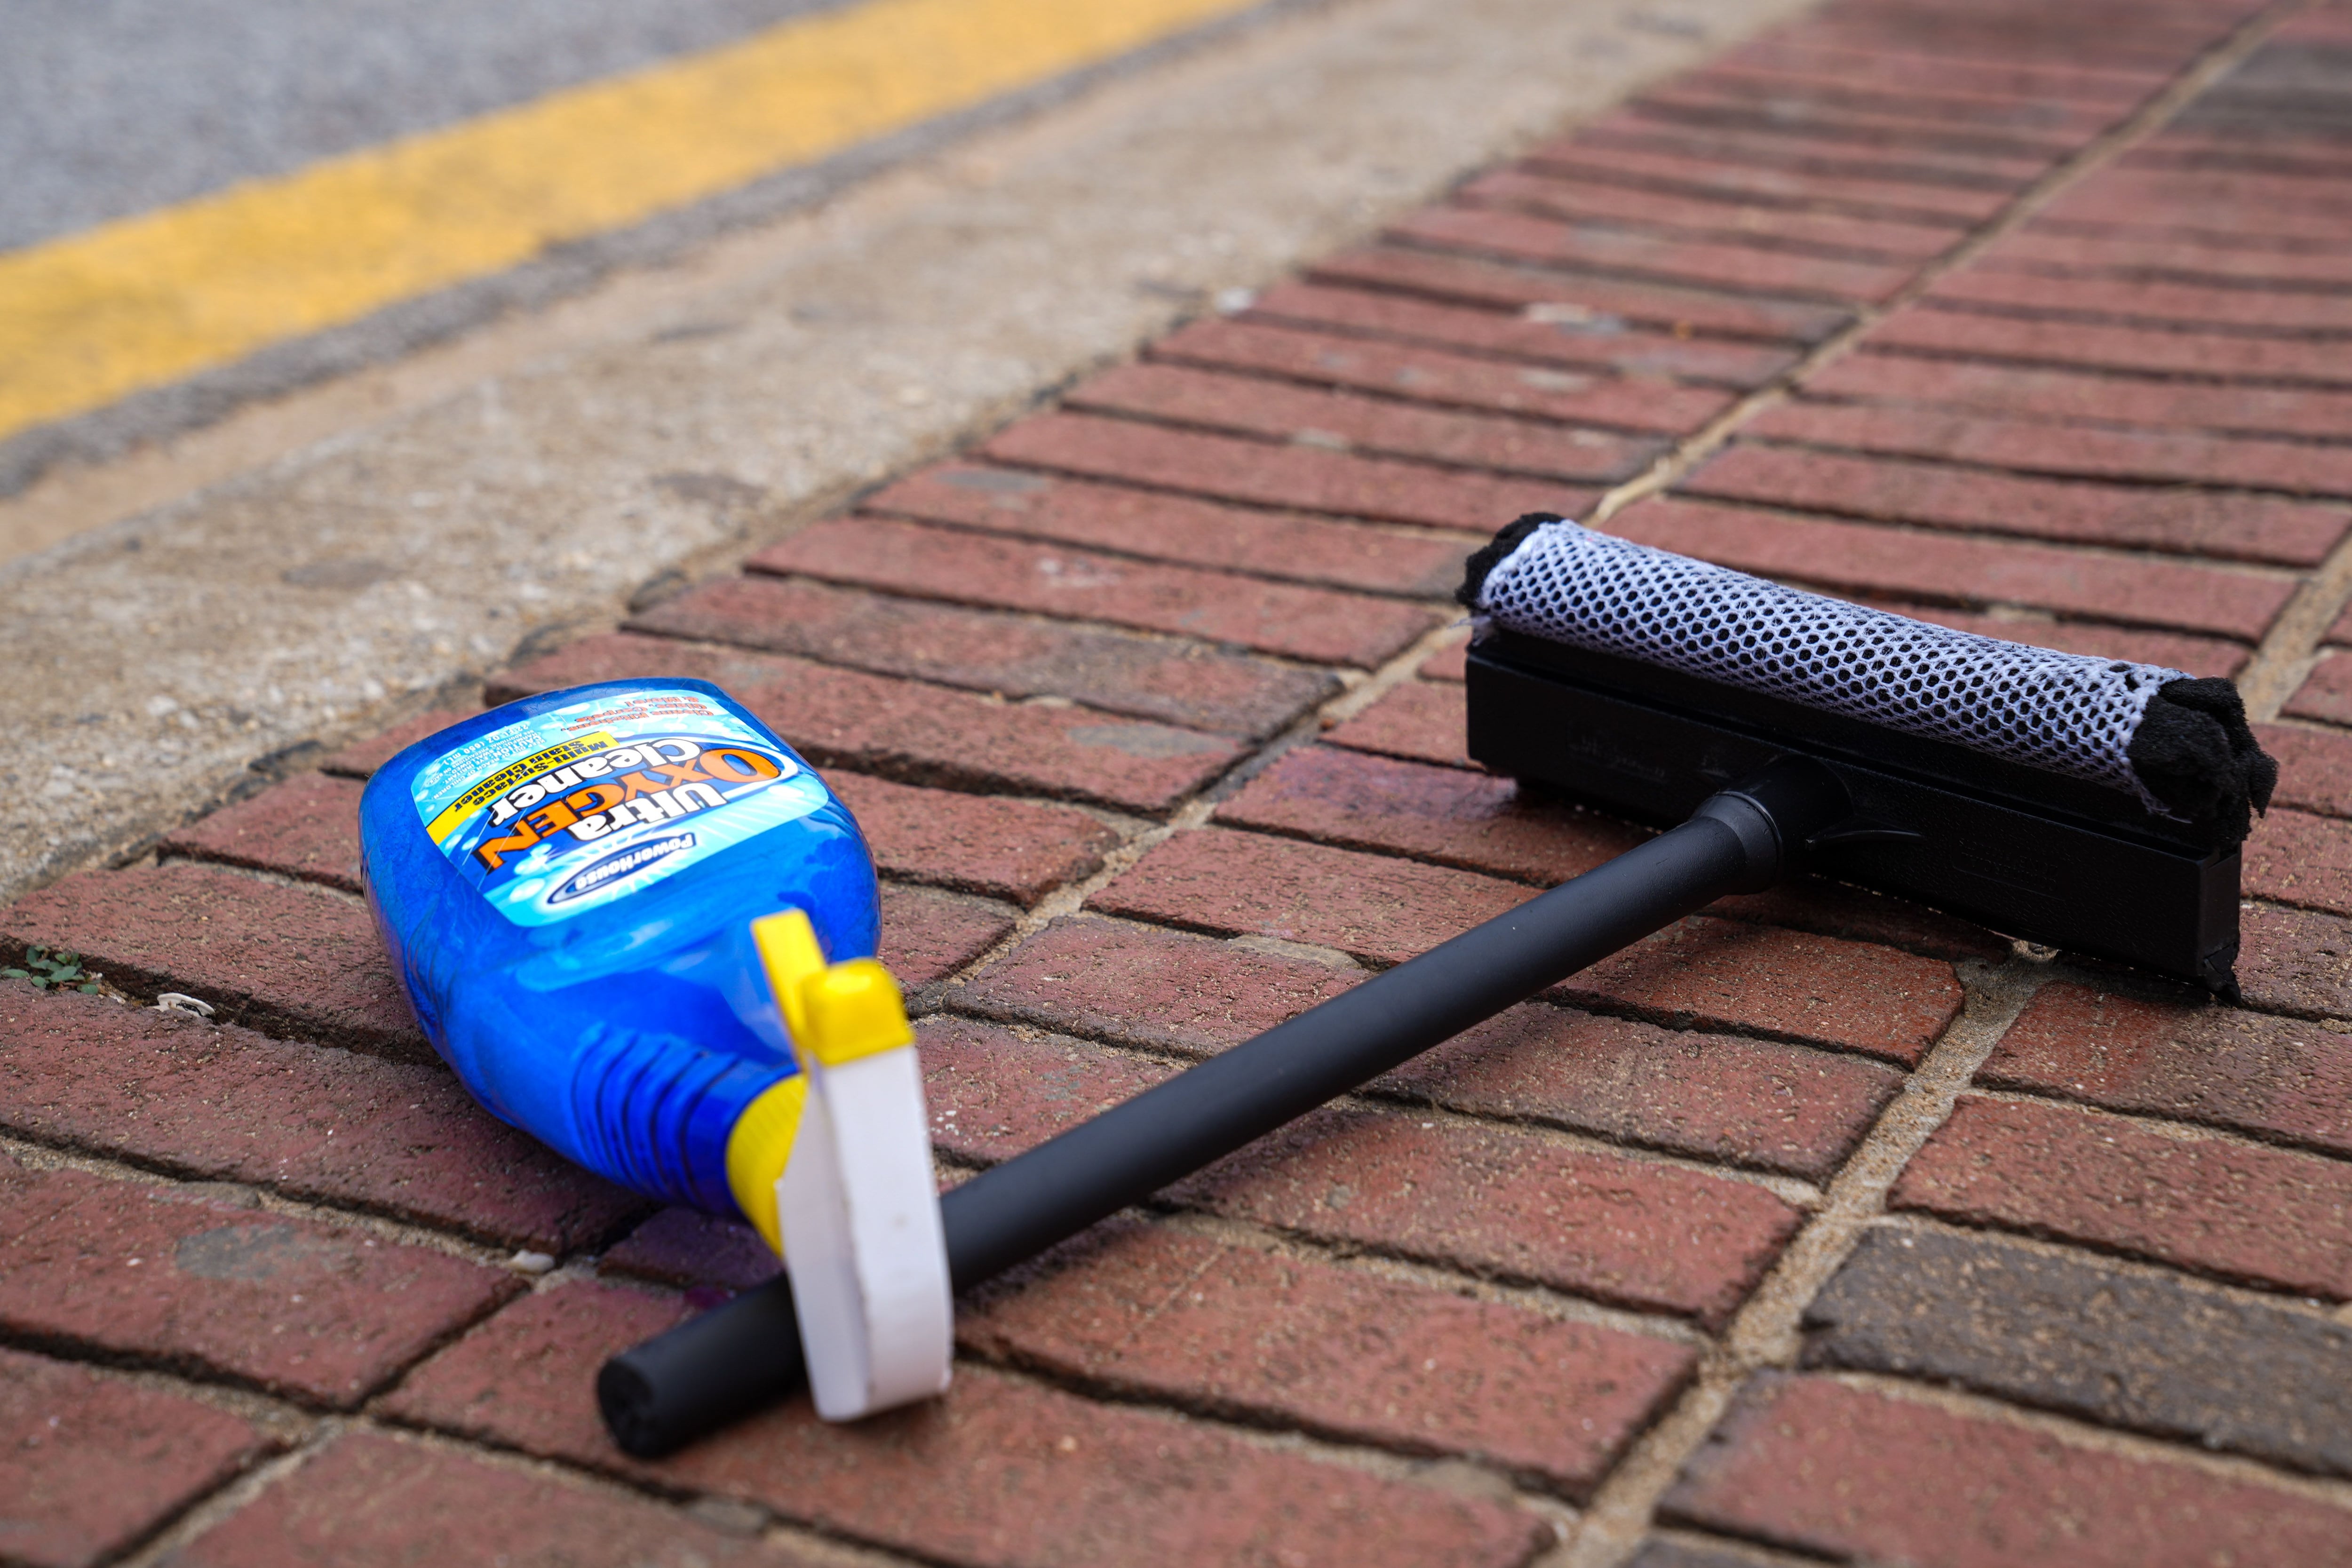 Baltimore has tried to solve its squeegee problem for decades